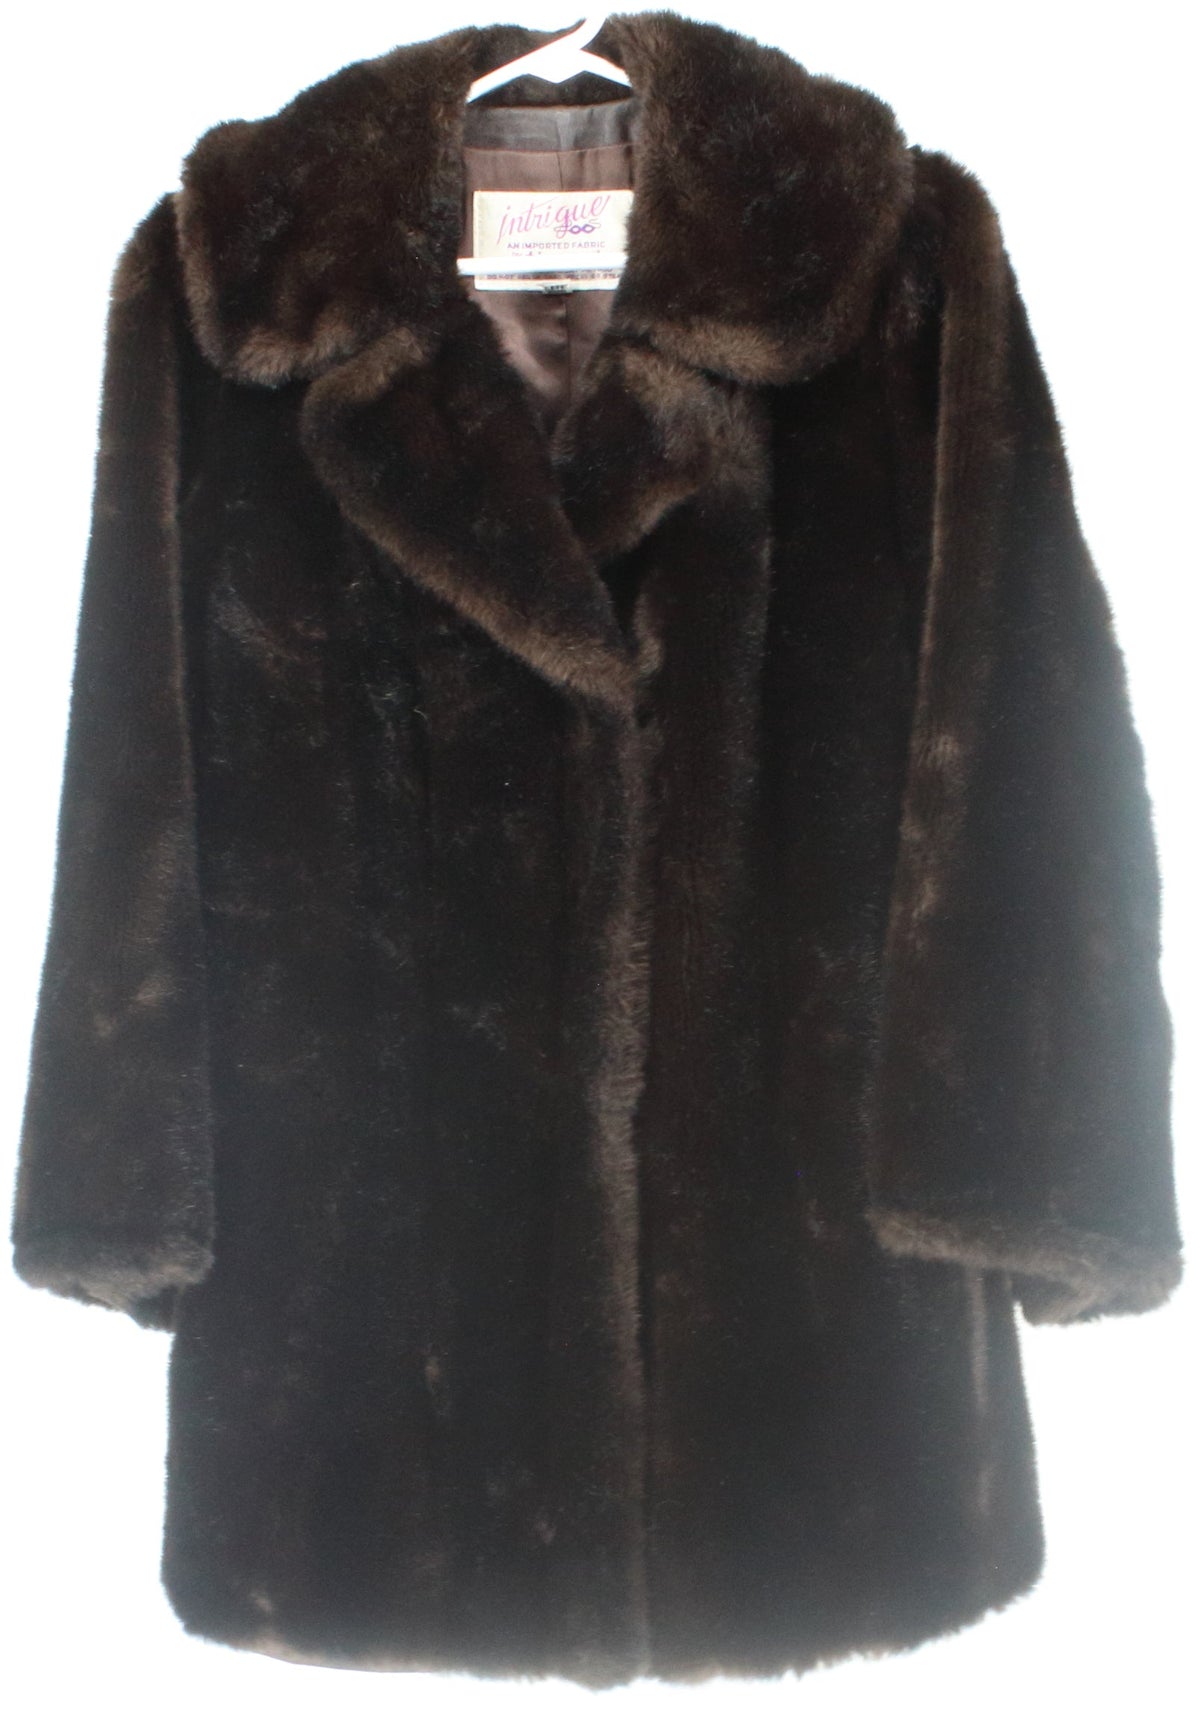 Intrigue Black and Brown Furry Women's Coat